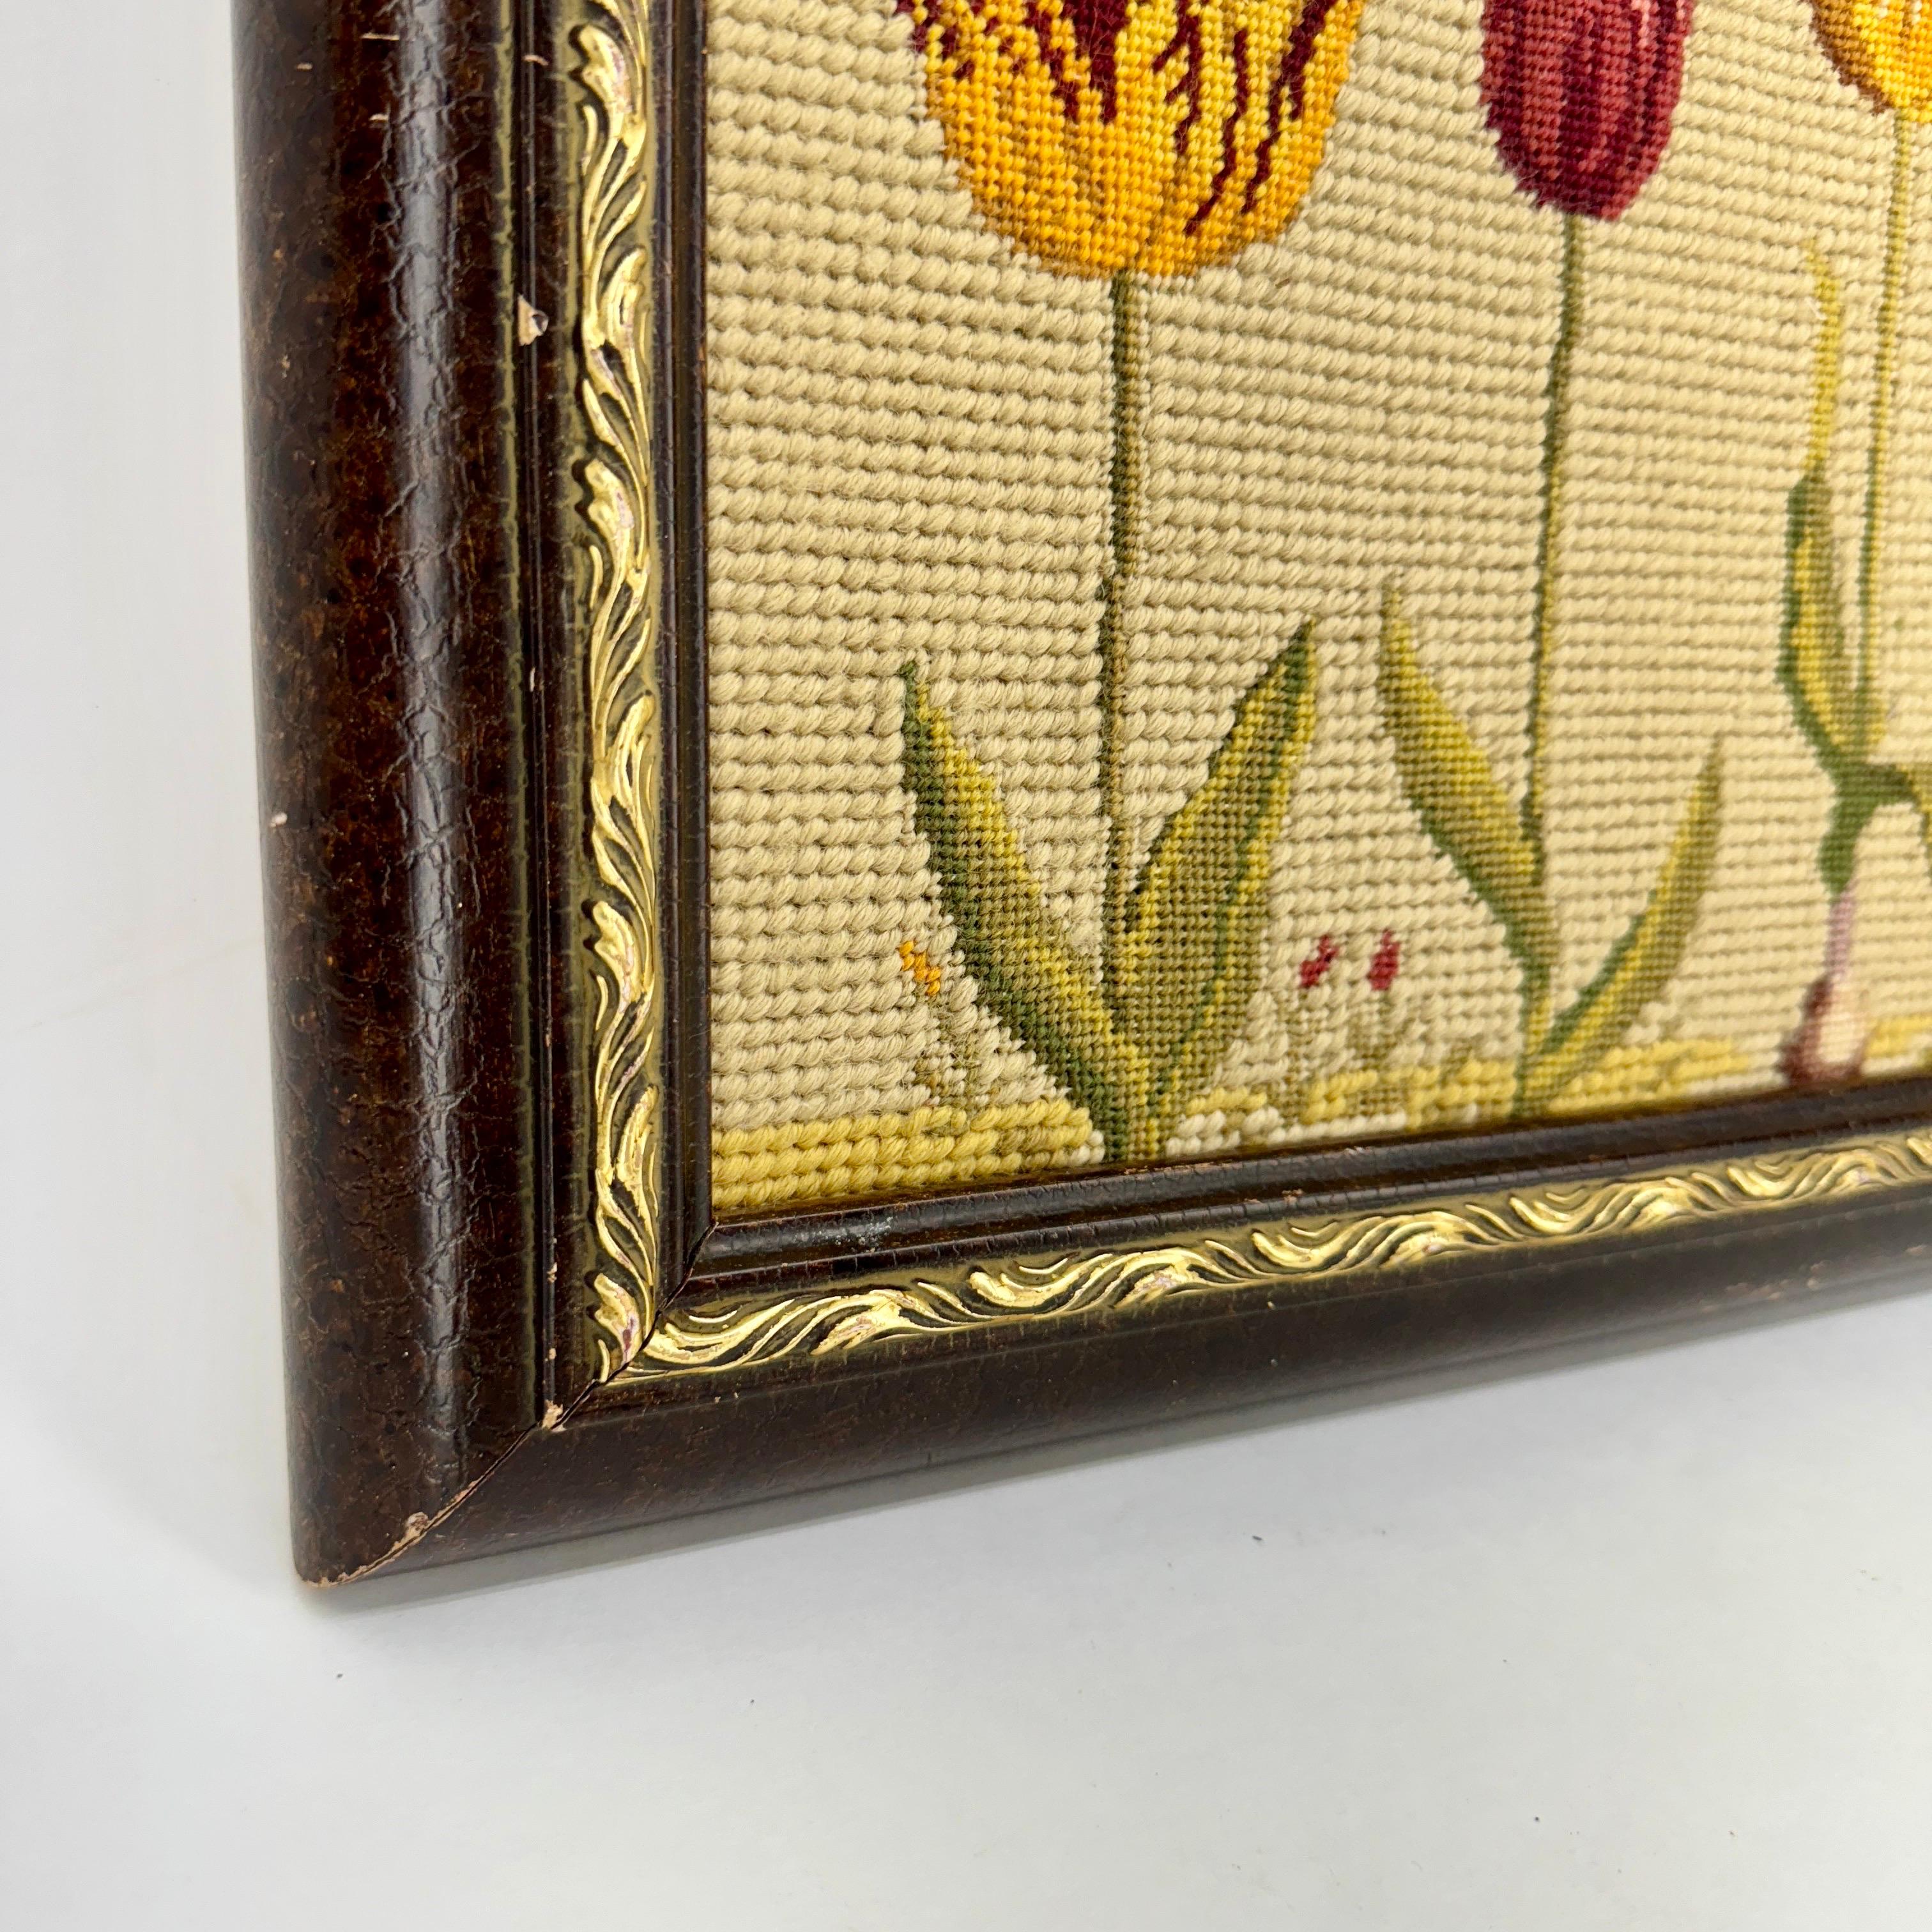 20th Century Chelsea Textiles Original Needlepoint Tulip Artwork In Red White and Yellow For Sale